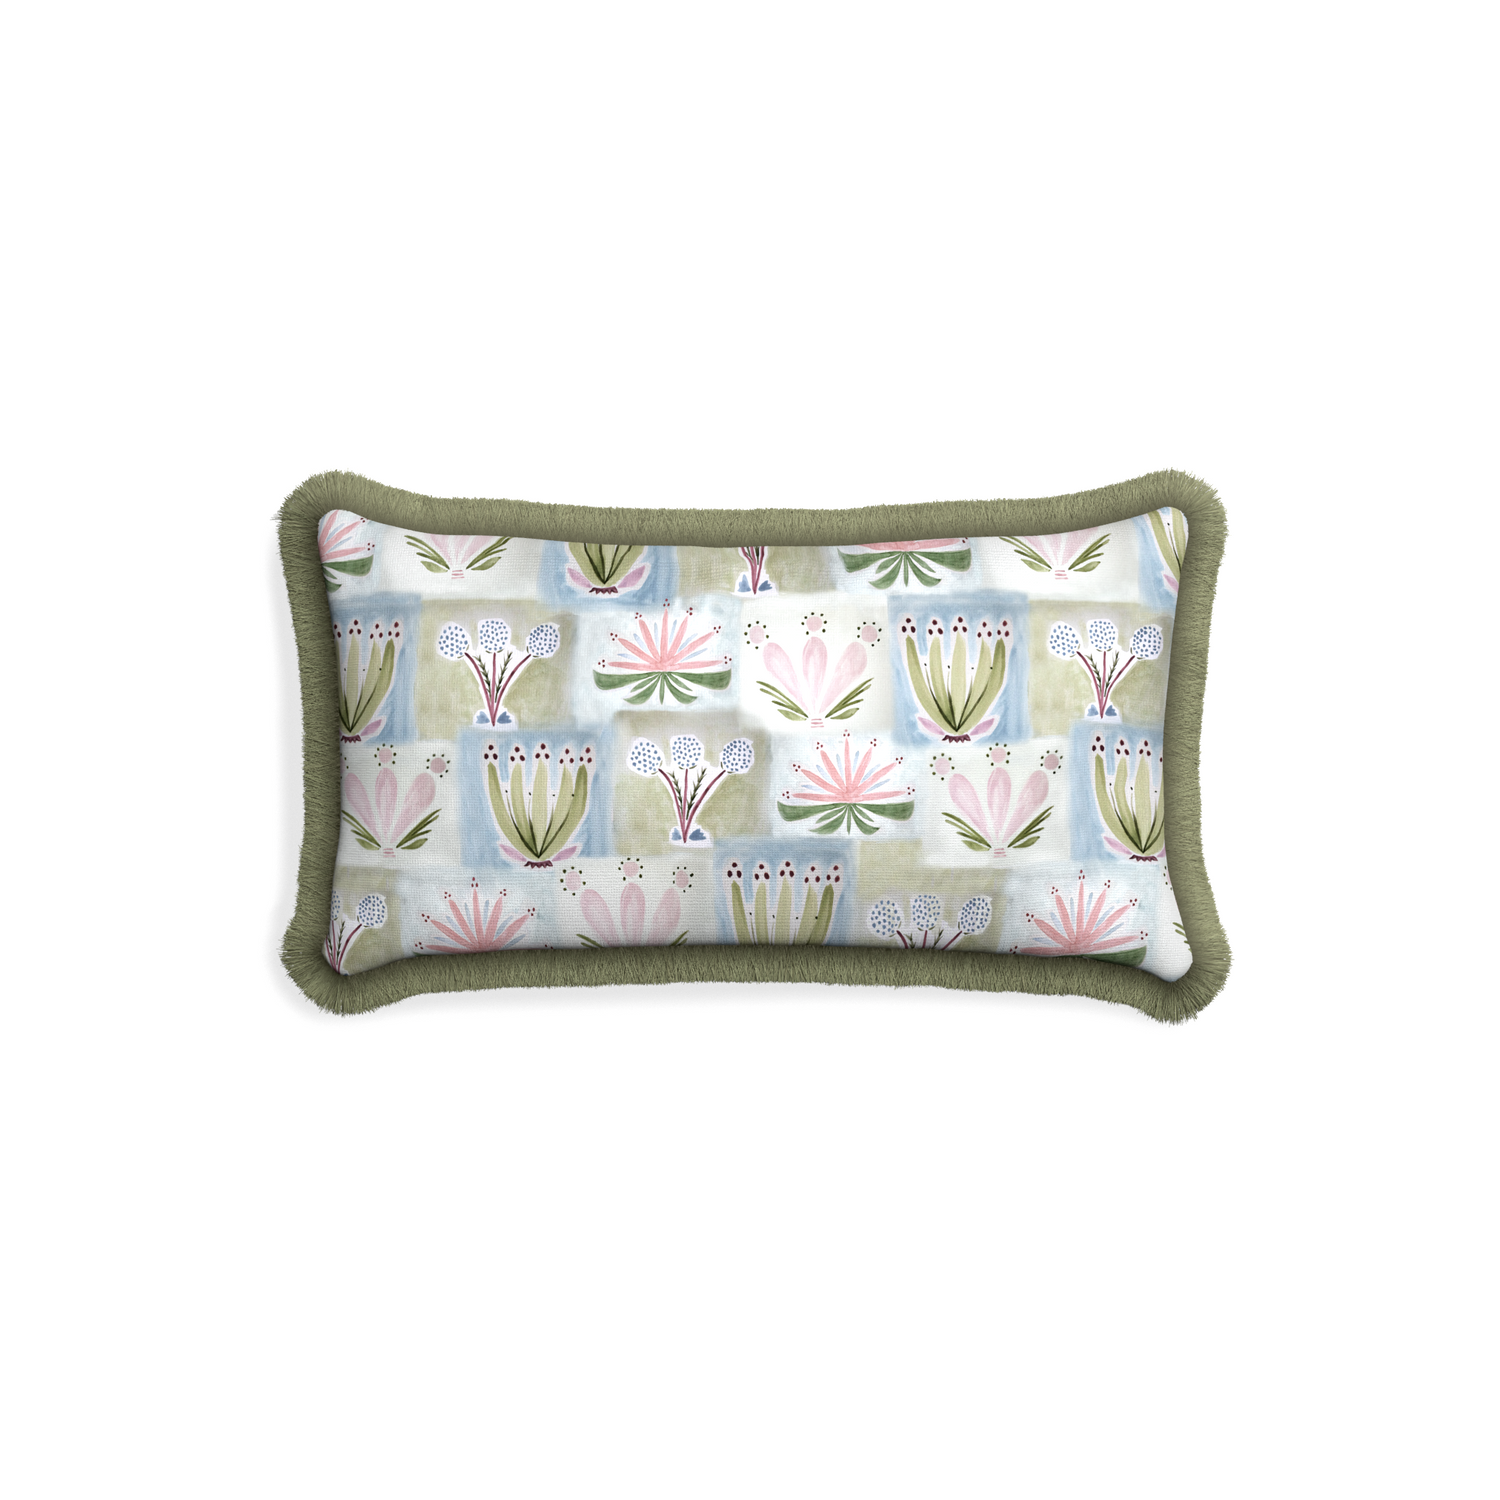 Petite-lumbar harper custom hand-painted floralpillow with sage fringe on white background